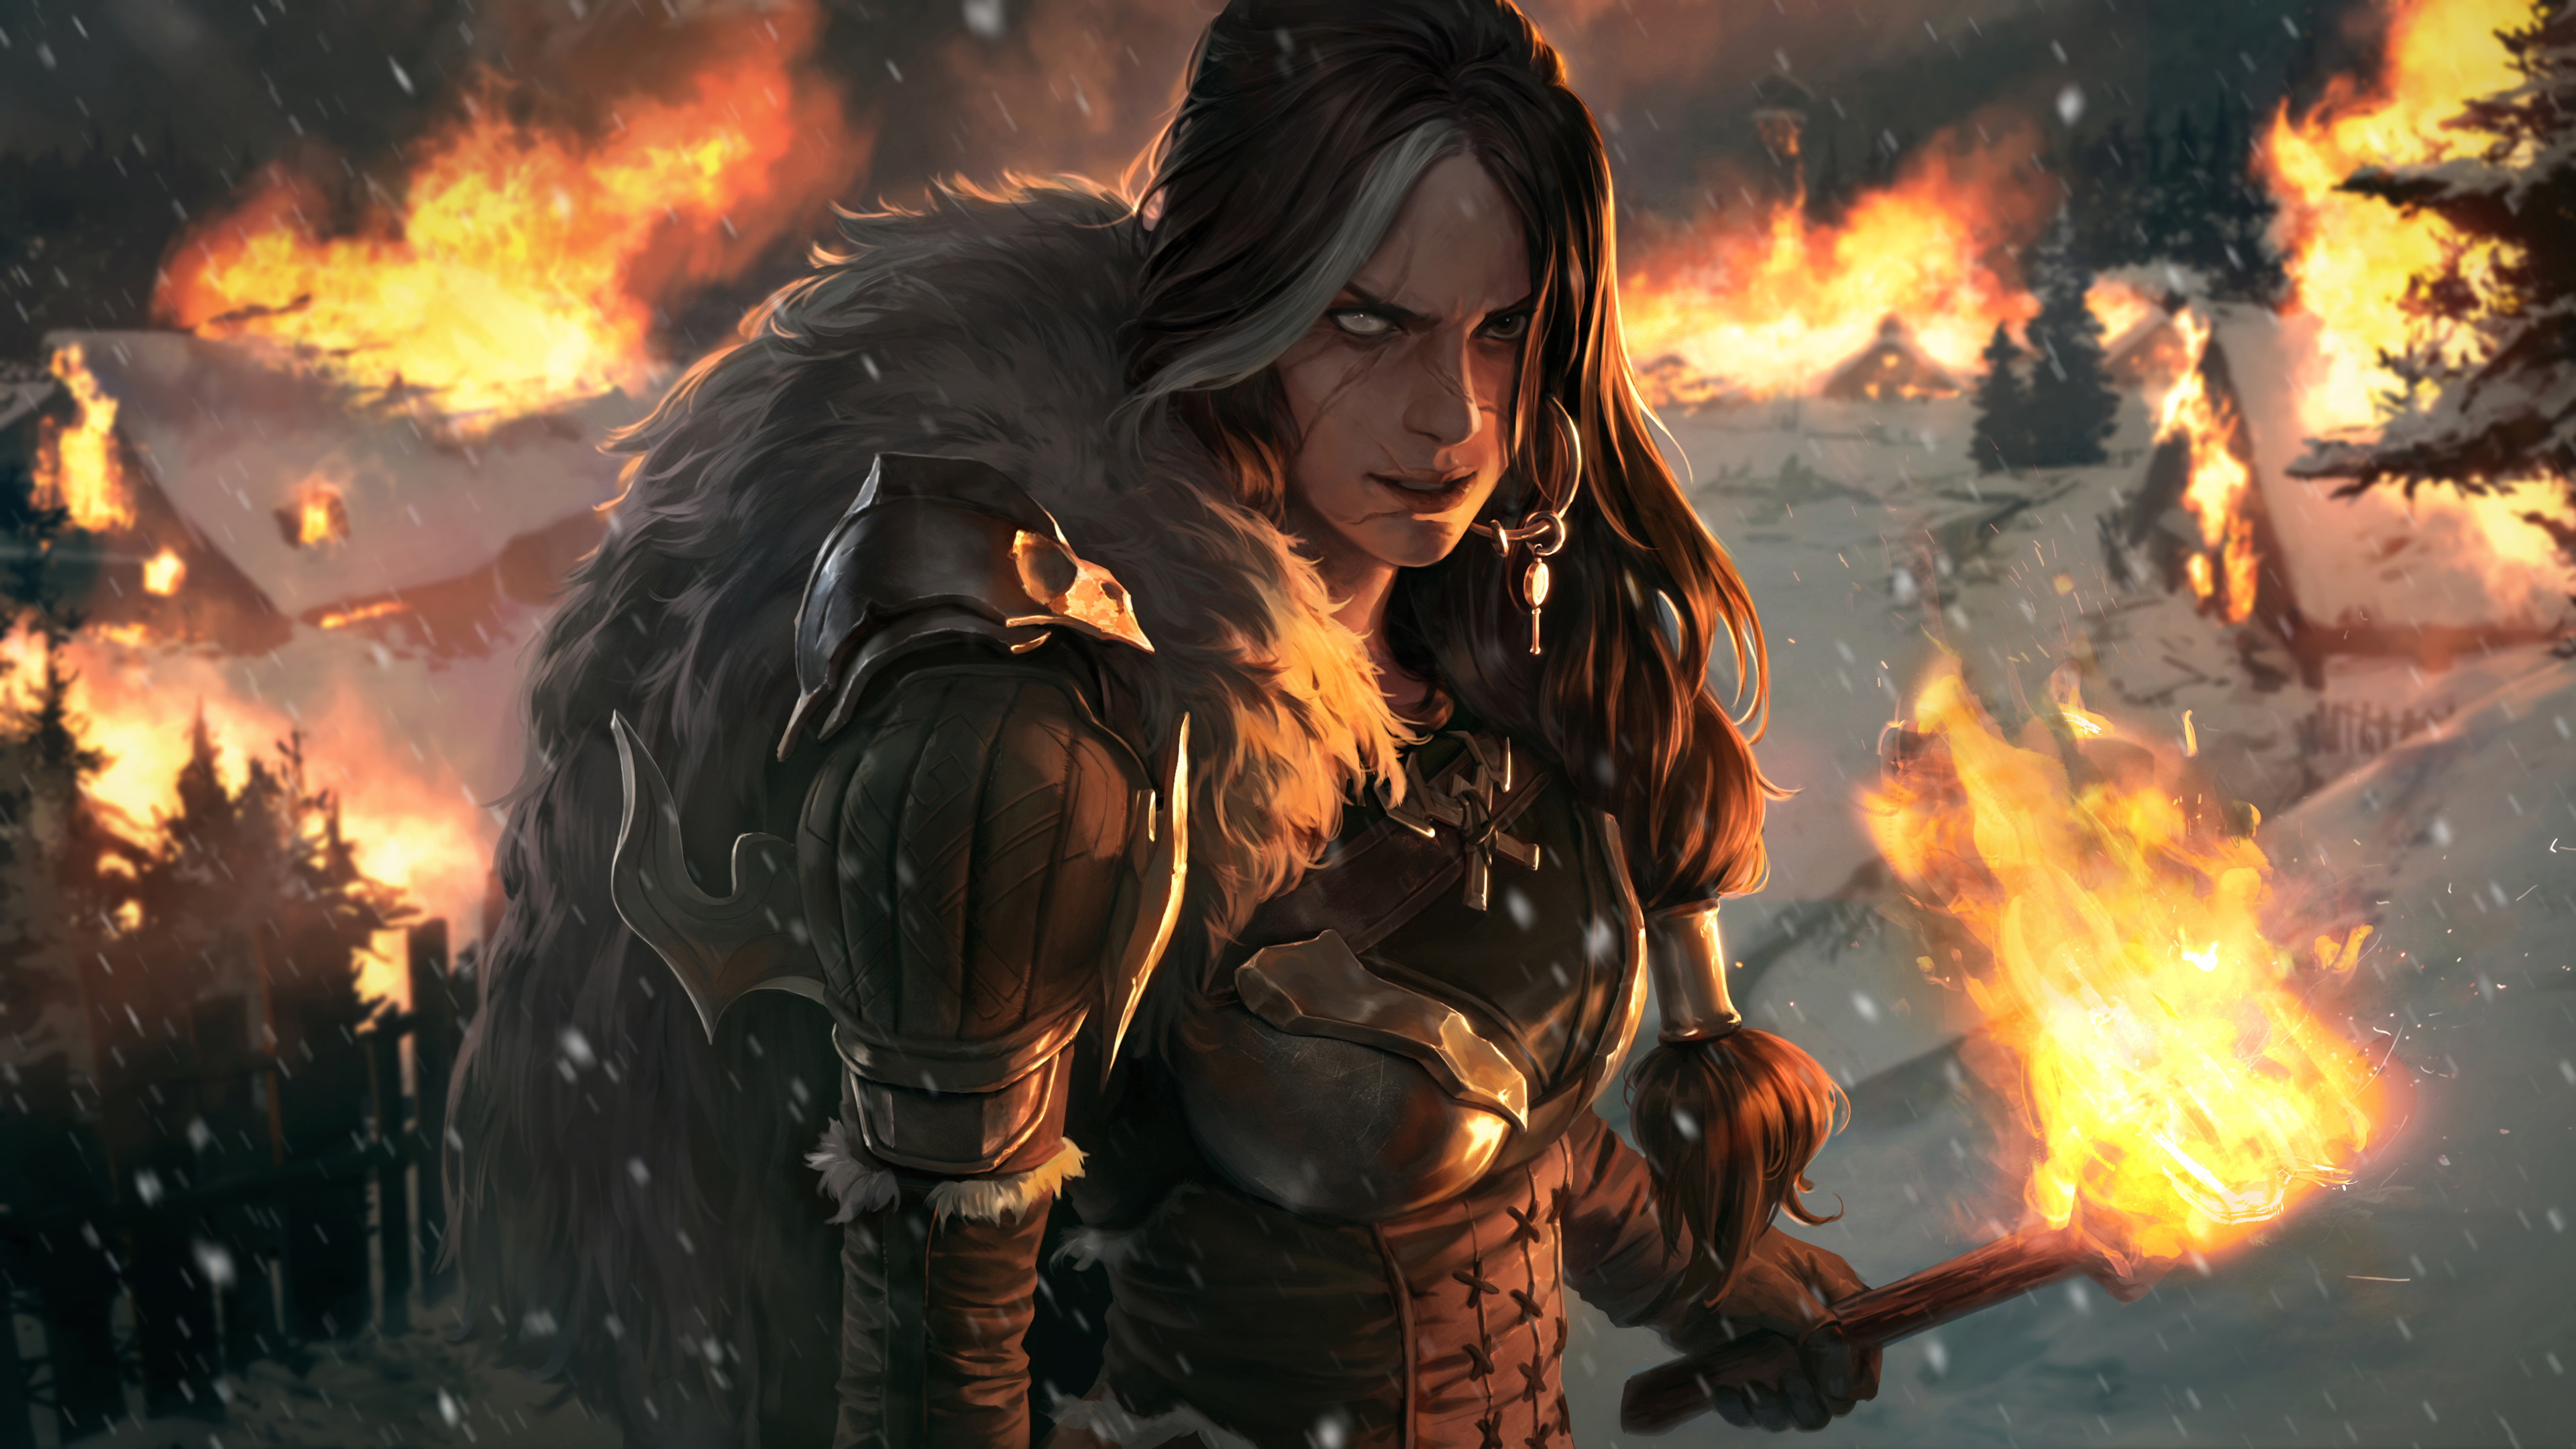 Legends Of Runeterra League Of Legends Fantasy Art PC Gaming Fantasy Girl Torches Fire Scars 3840x2160